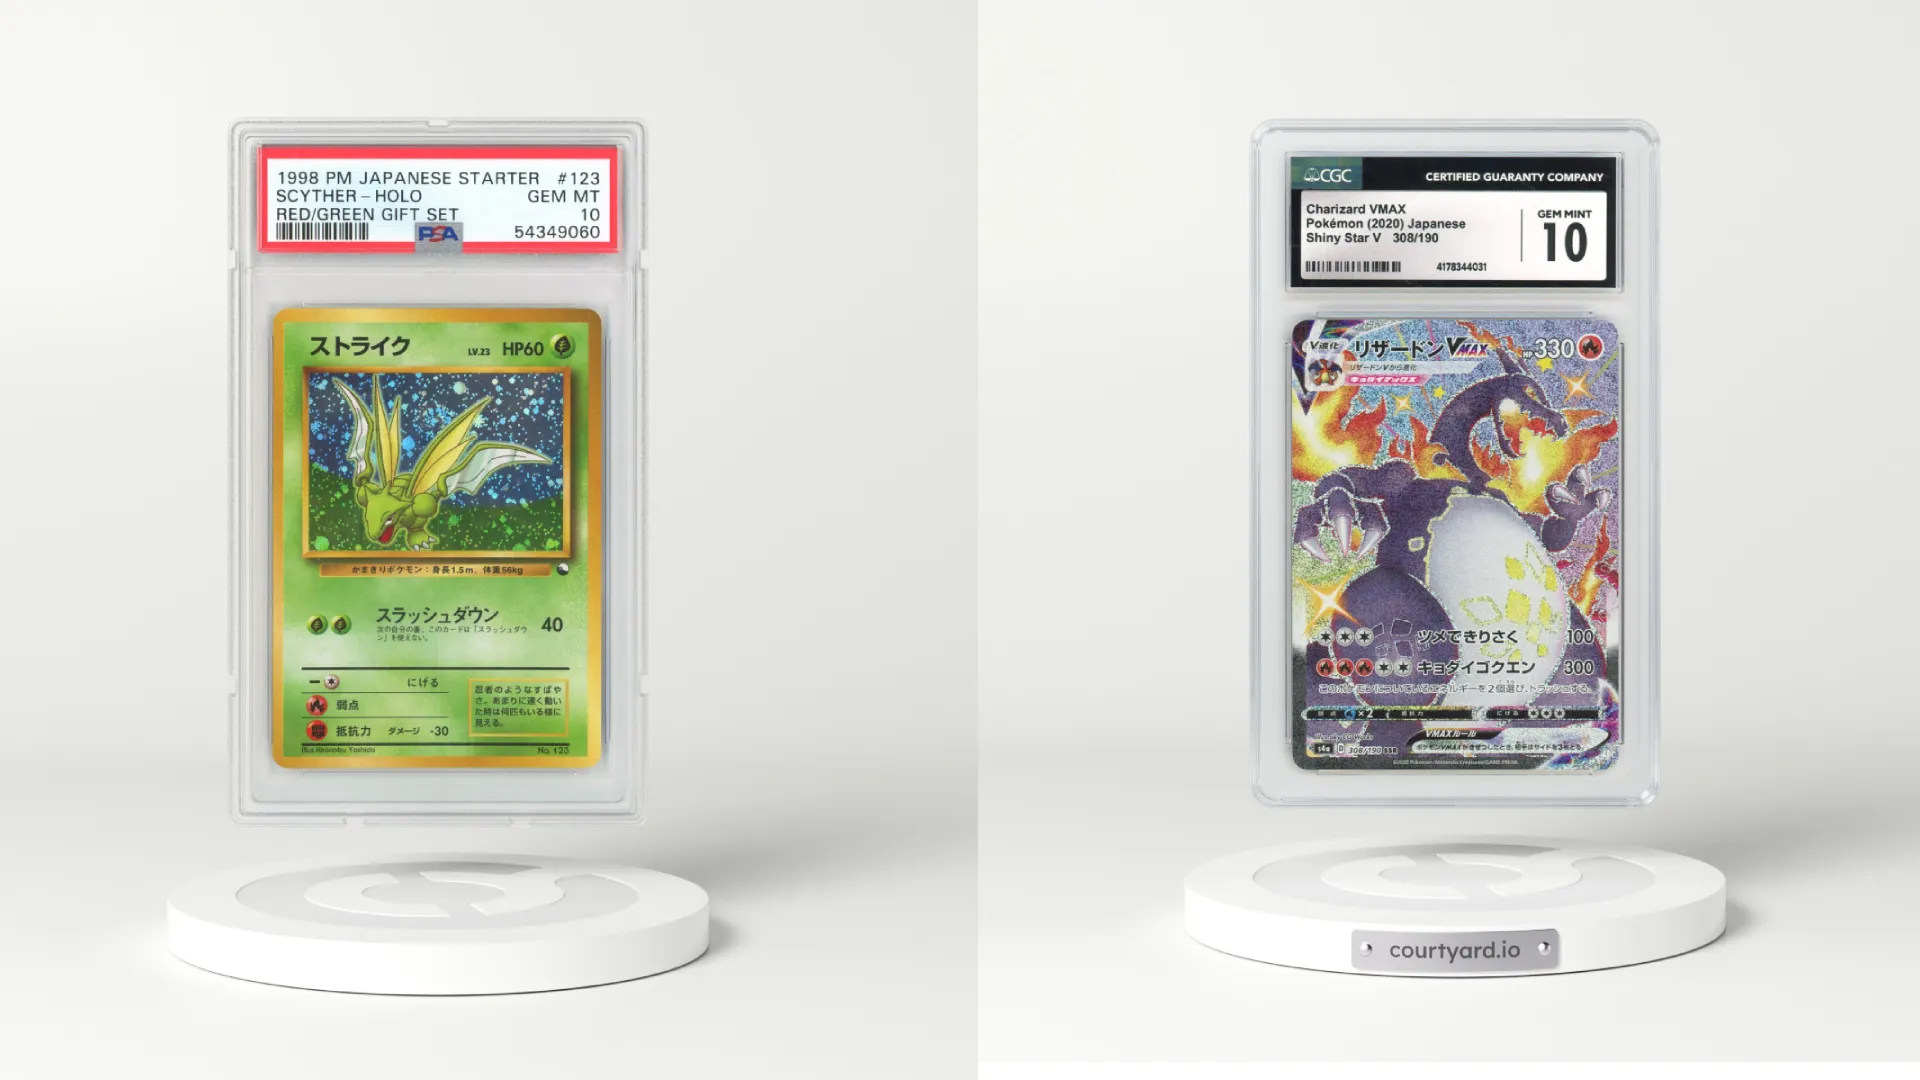 Images of rare Scyther and Charizard cards.